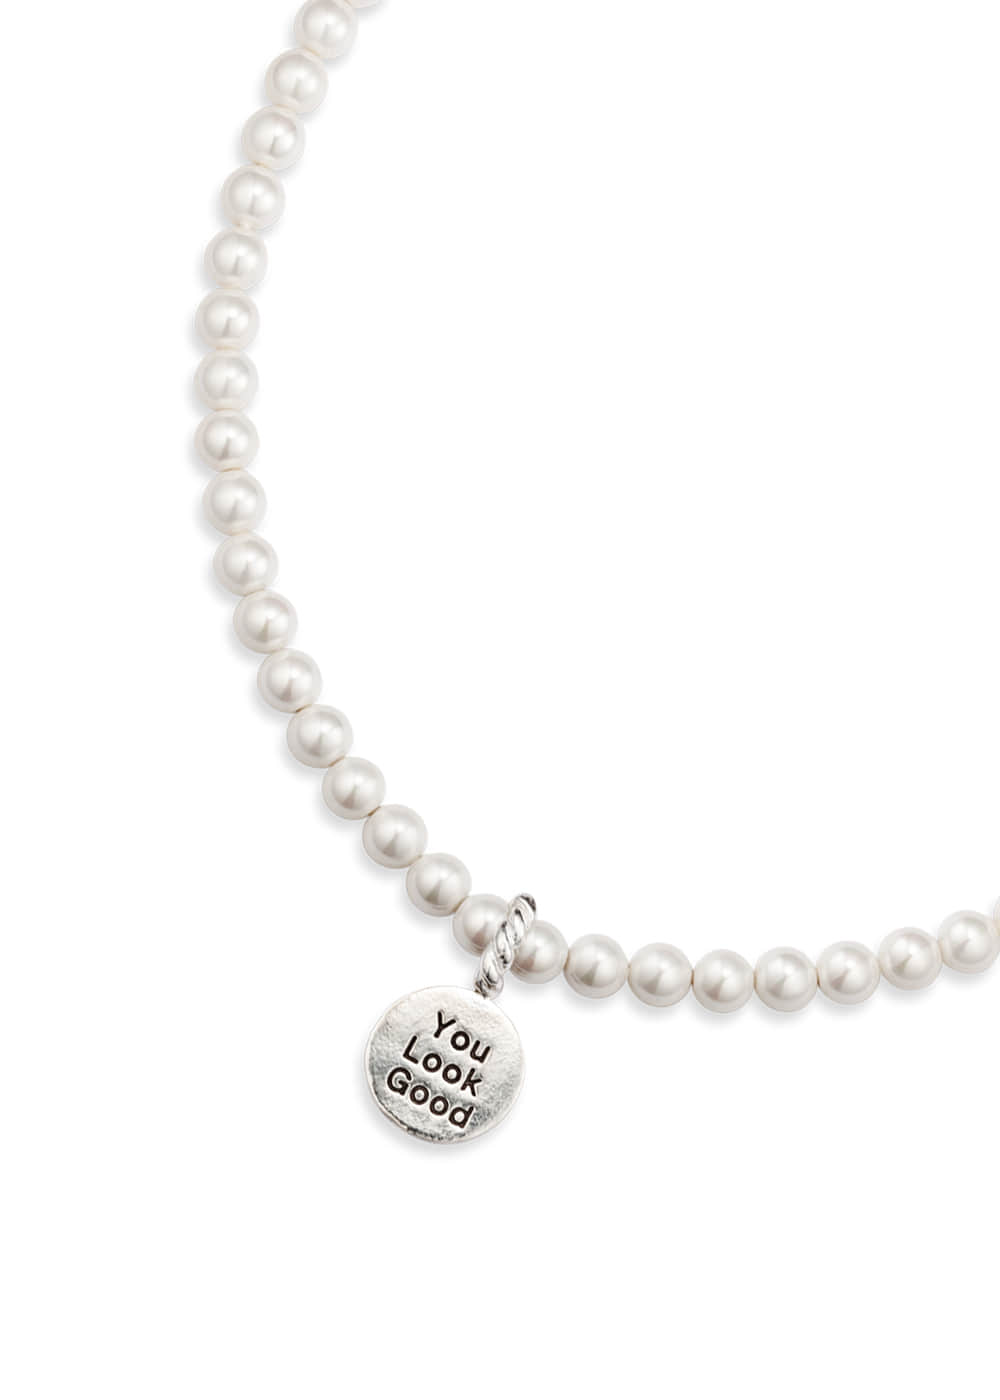 Pearl YLG Necklace